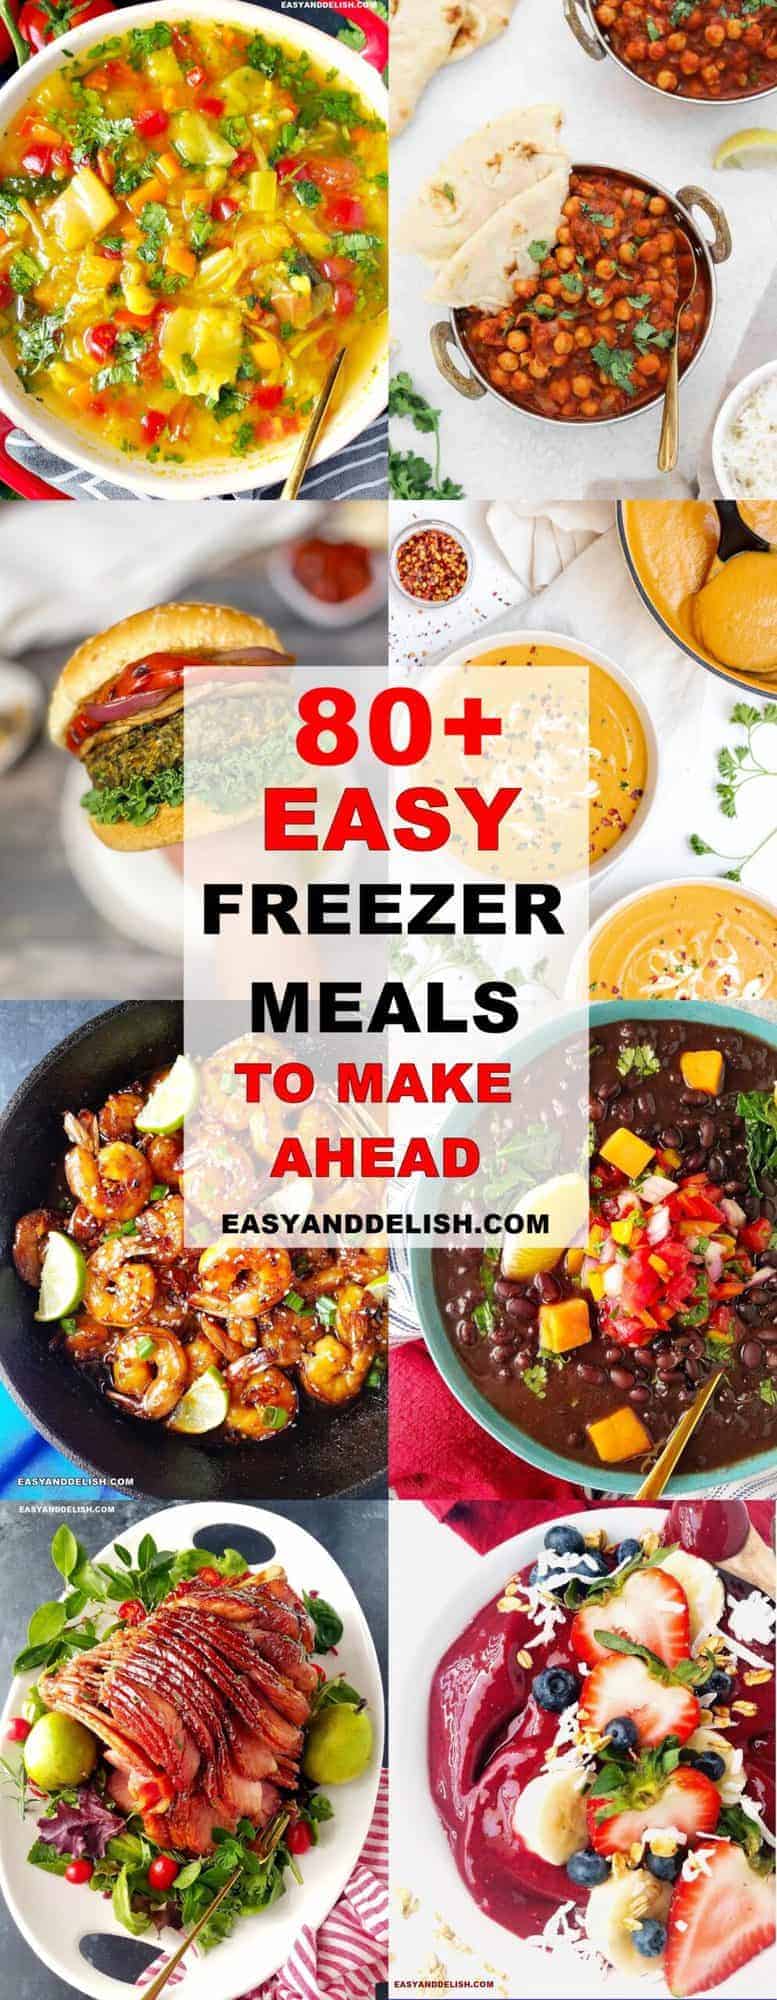 Low-cost freezer meal options